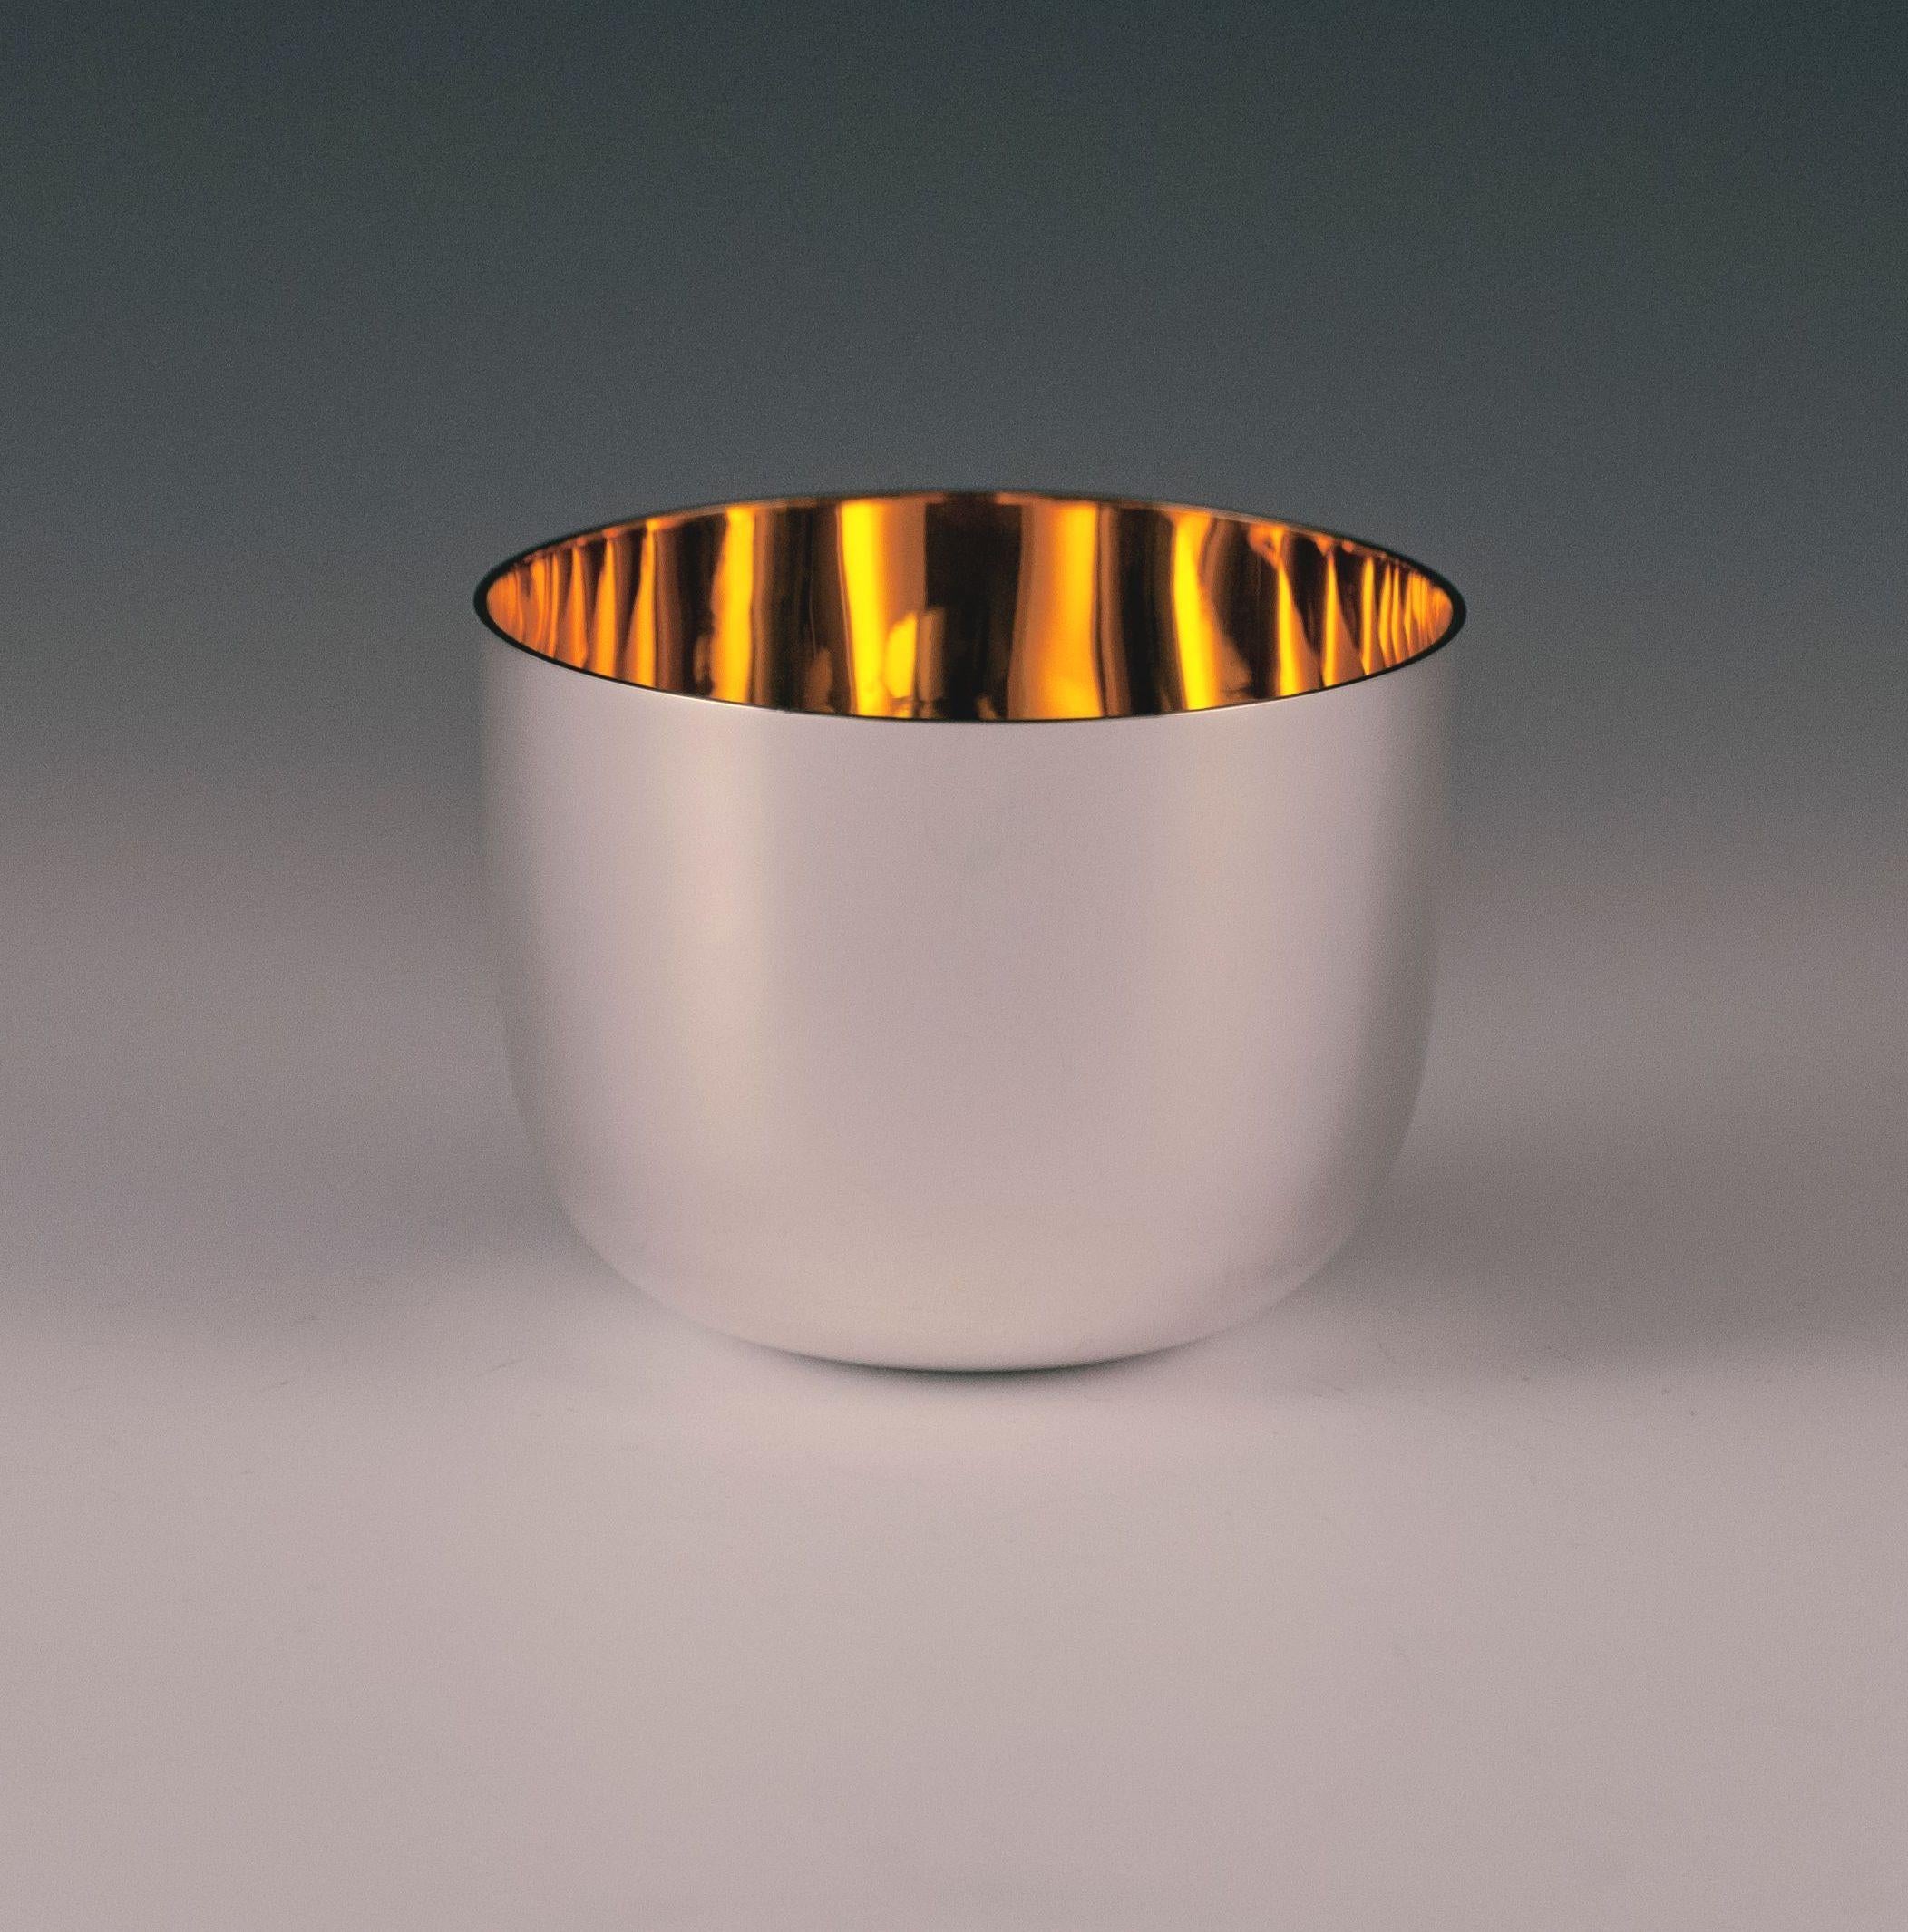 A Sterling silver tumbler cup / beaker, having a plain round body and a gold-gilt interior. Made in Sheffield in 2014. The dimensions of this Fine tumbler cup are height 2.25 inches 6 cm, diameter 3 inches 7.5 cm the tumbler cup would make a perfect